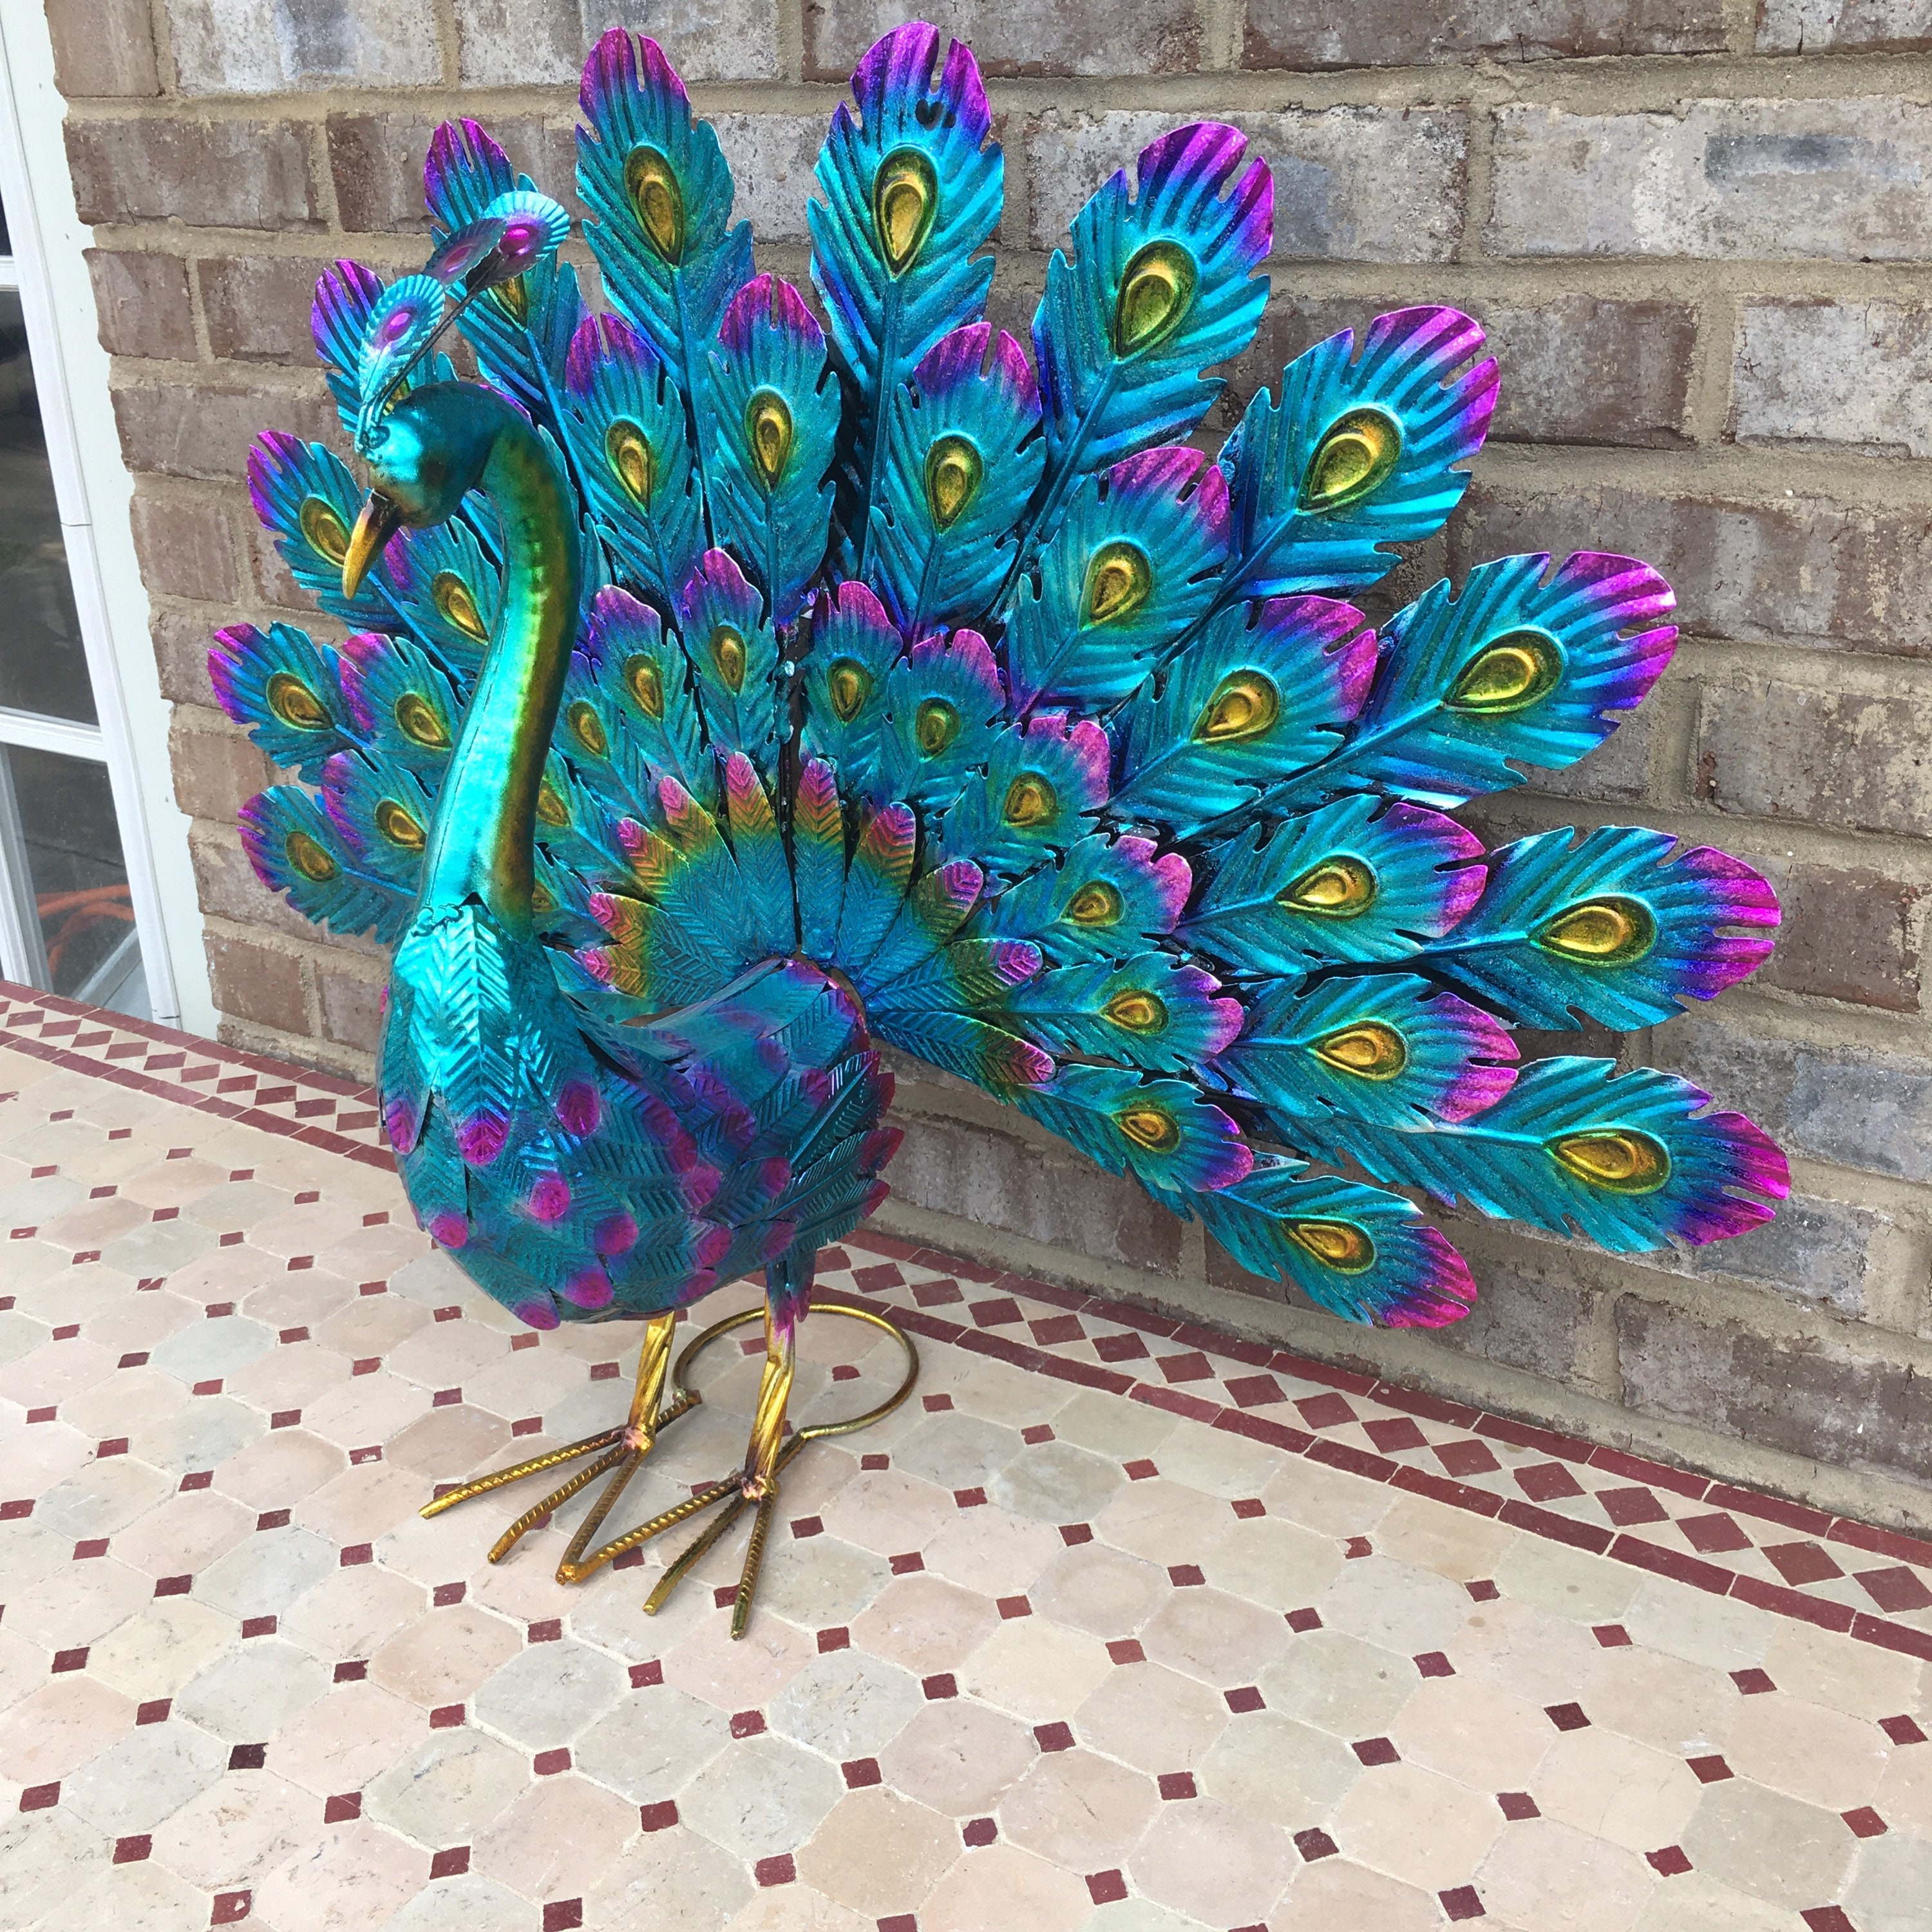 💖Mother's Day Sale💖45%OFF - Beautiful Peacock Statue Decor🦚